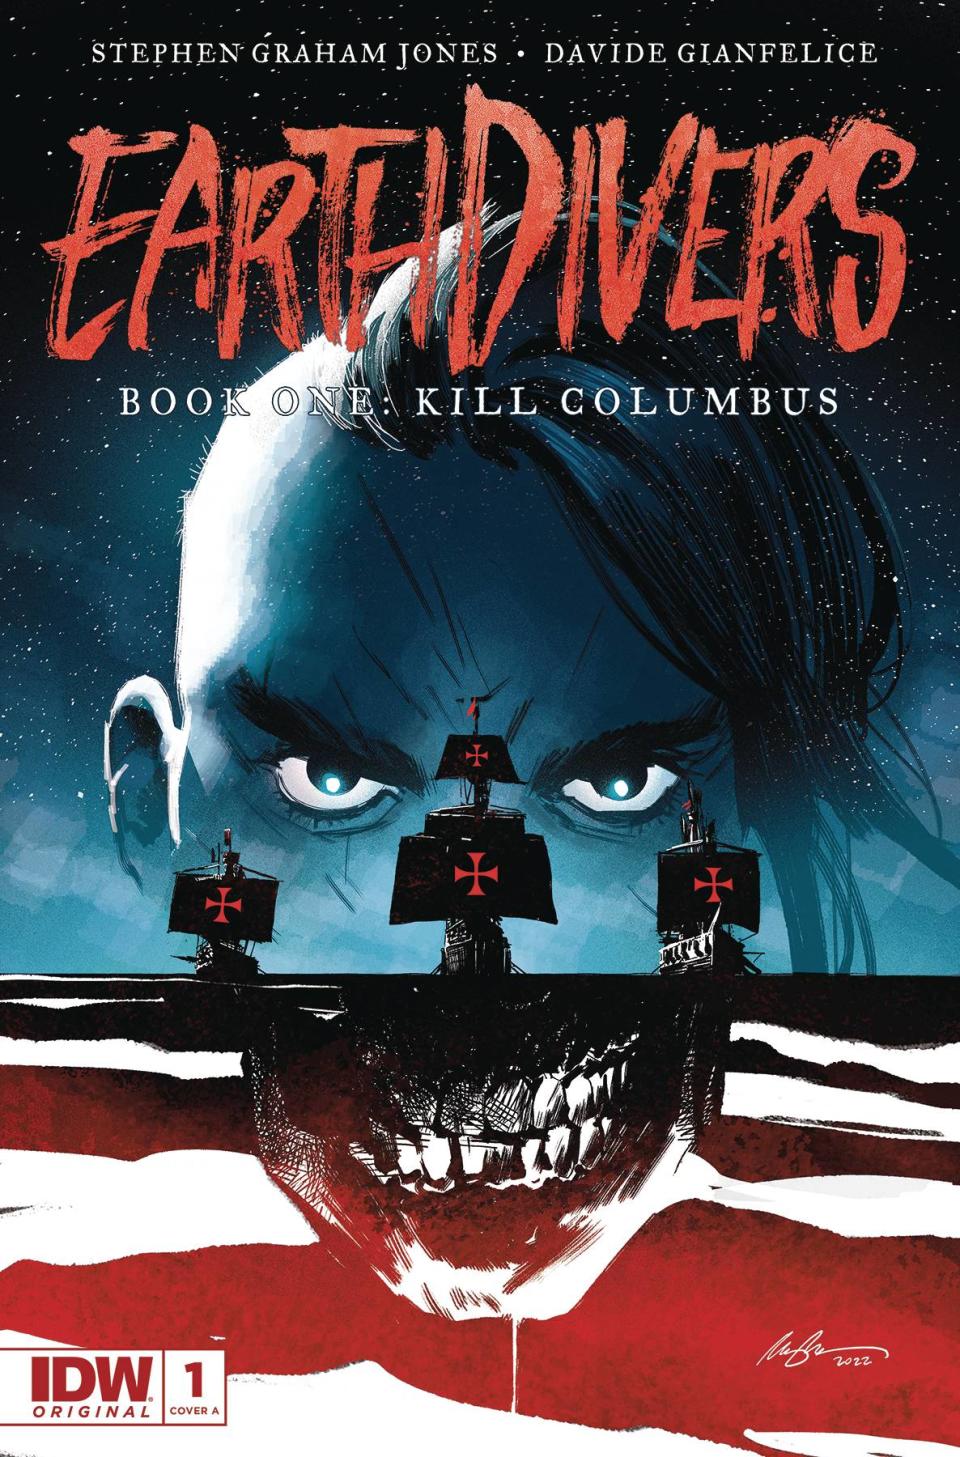 The cover of Earthdivers shows the main character Tad's head merged with a skull mouth and colonial spanish ships